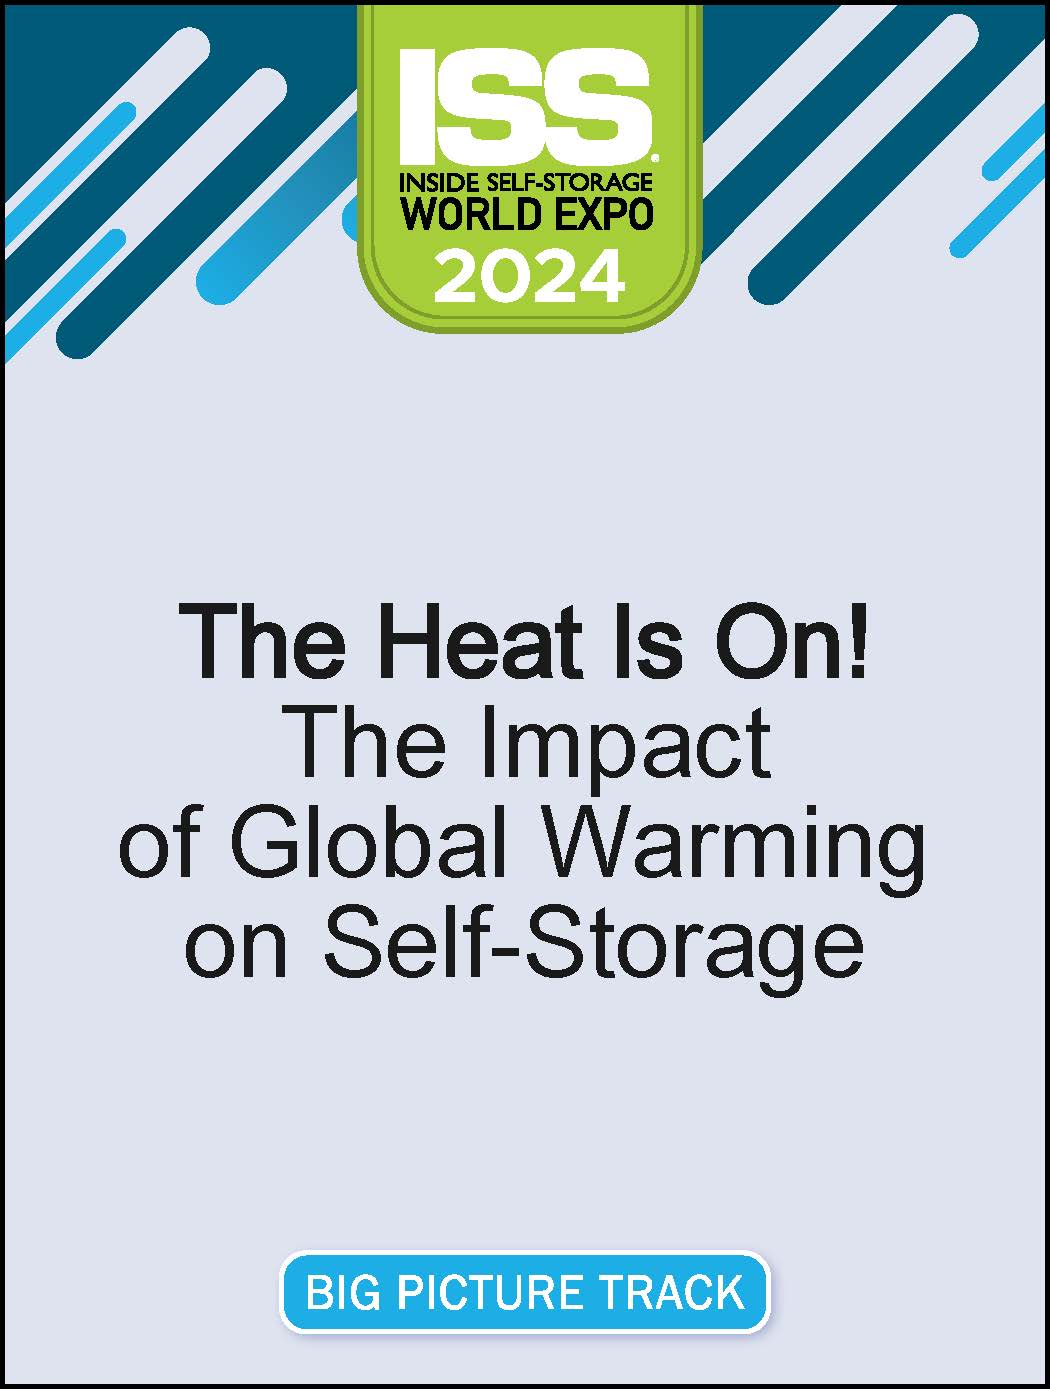 Video Pre-Order Sub - The Heat Is On! The Impact of Global Warming on Self-Storage